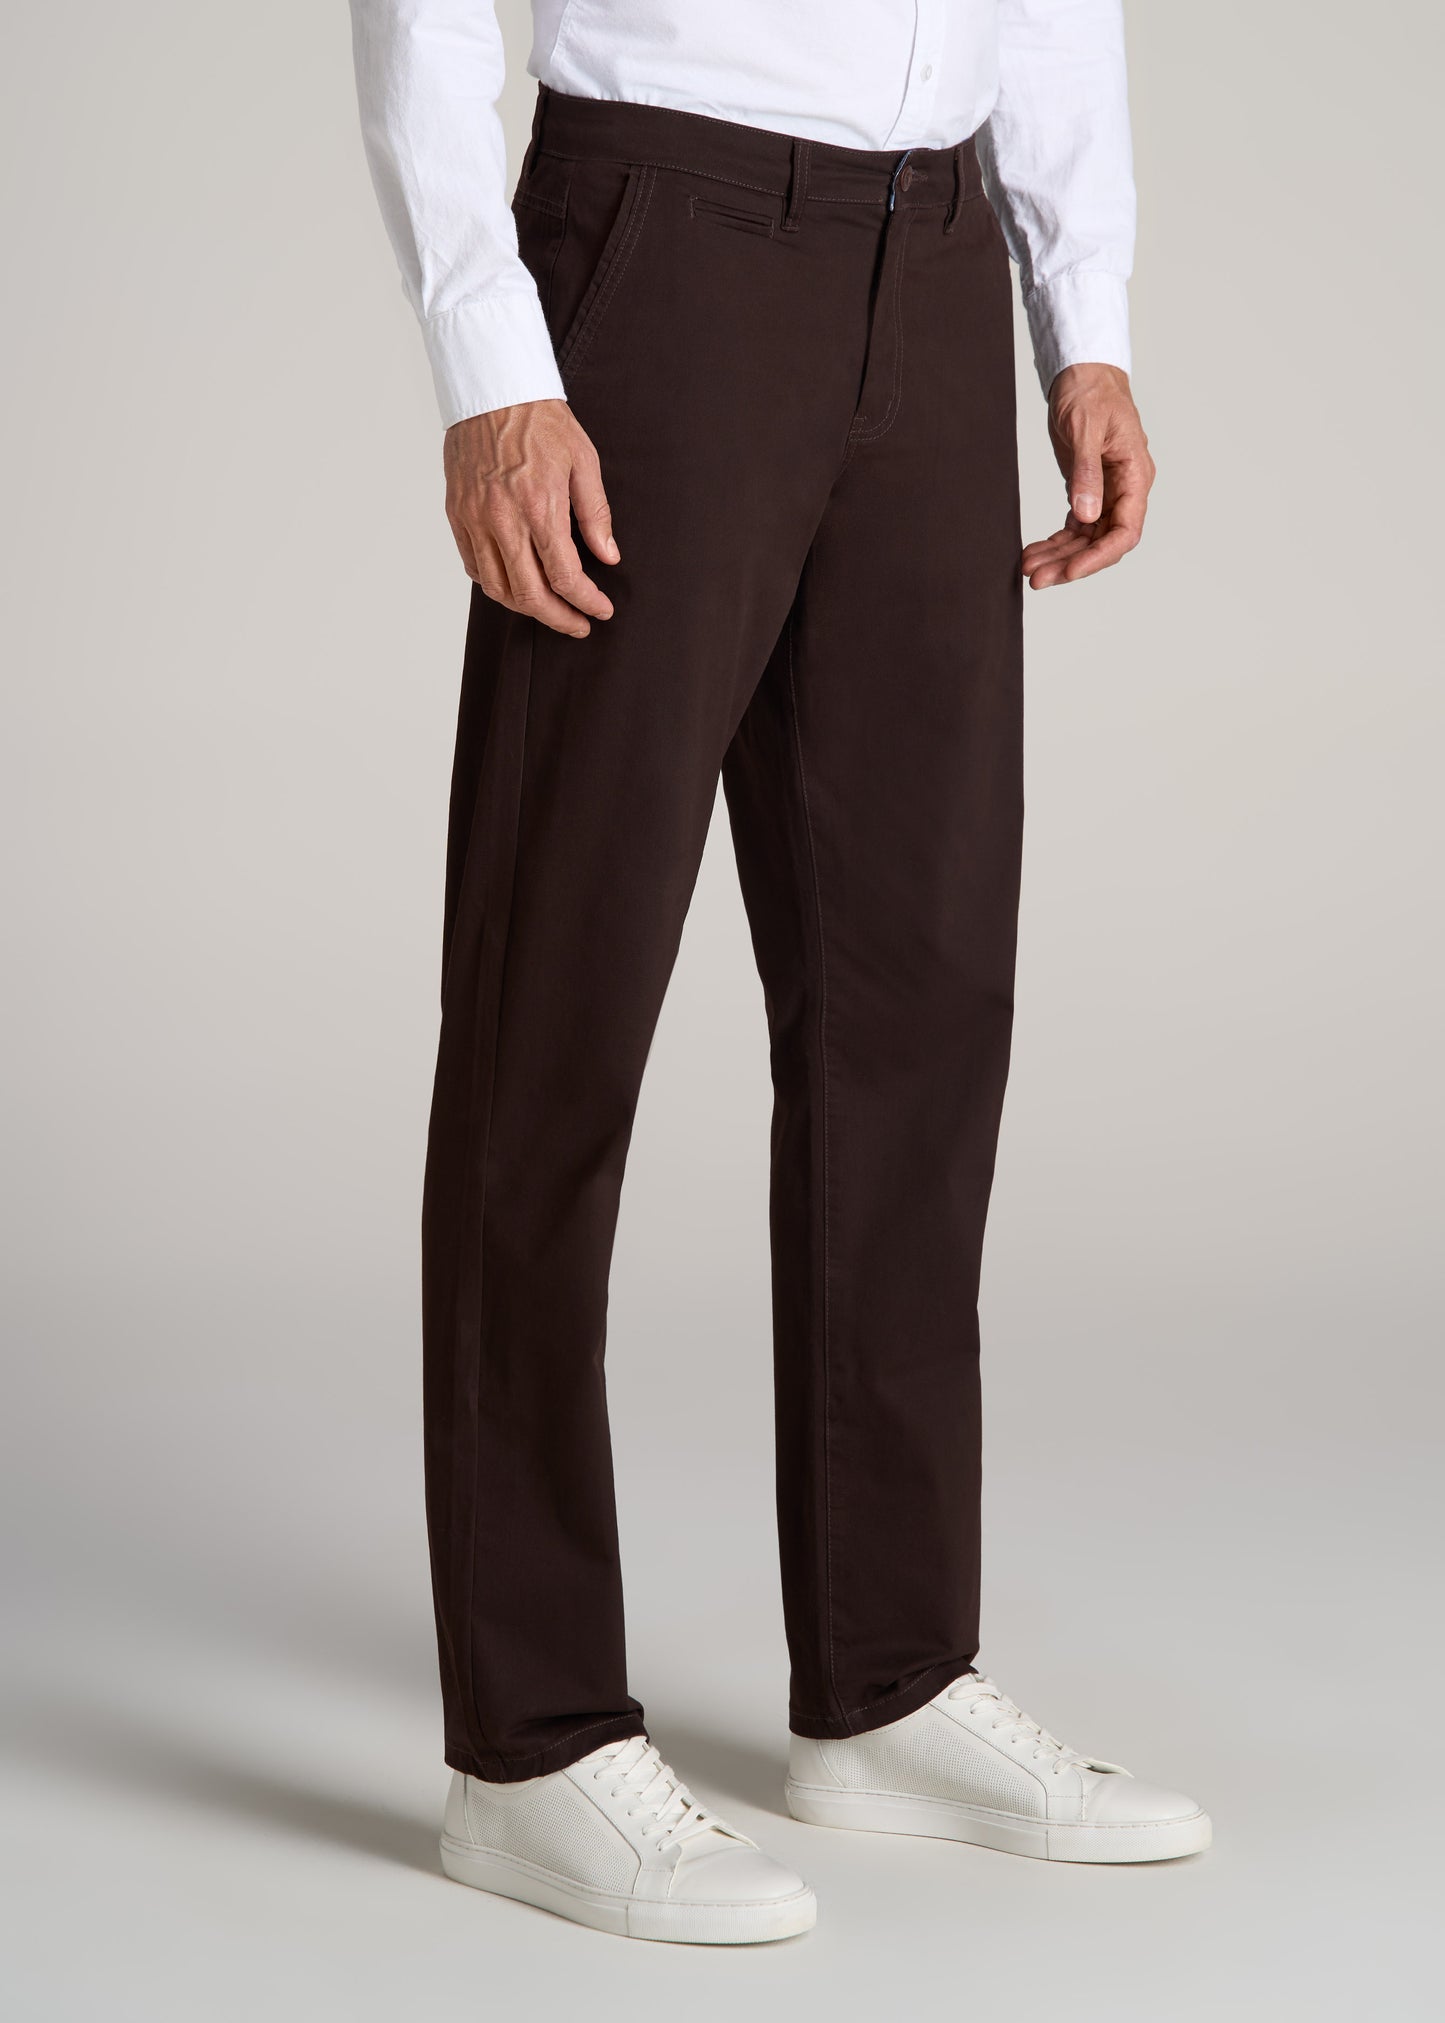 J1 STRAIGHT Leg Chinos in Chocolate - Pants for Tall Men